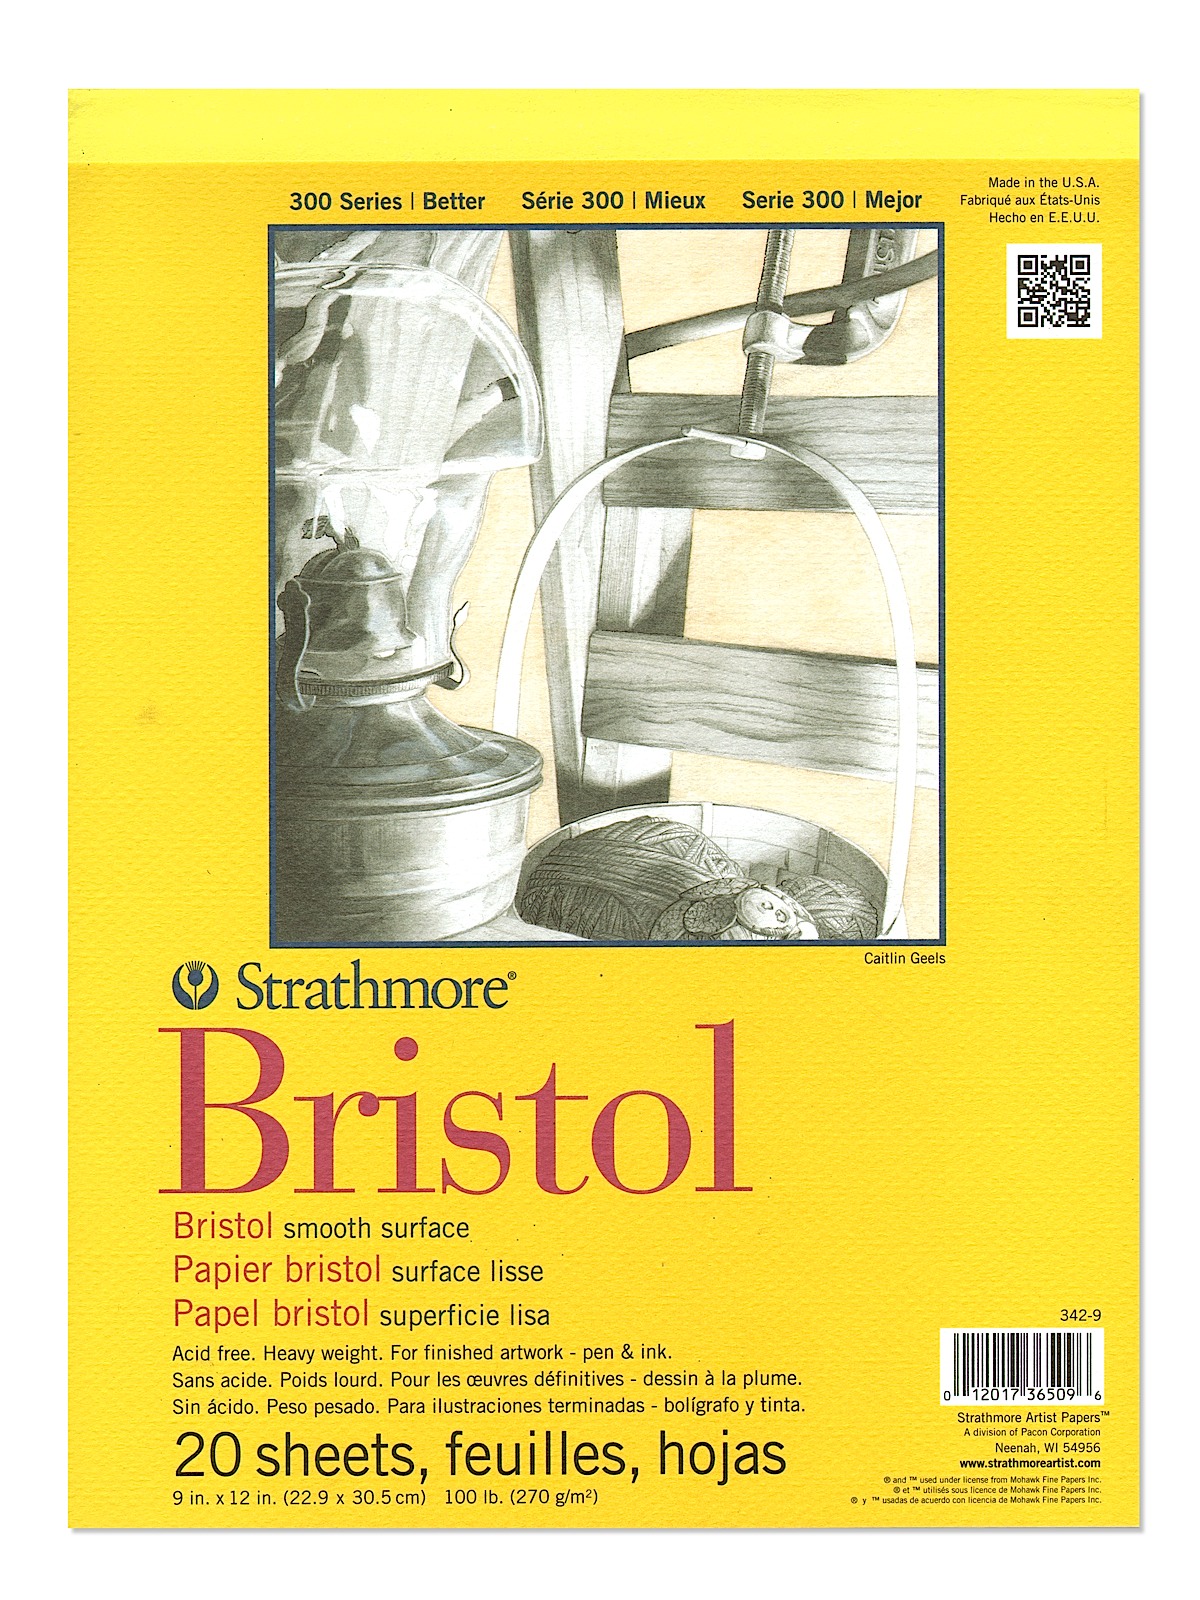 300 Series Bristol Smooth 9 In. X 12 In.